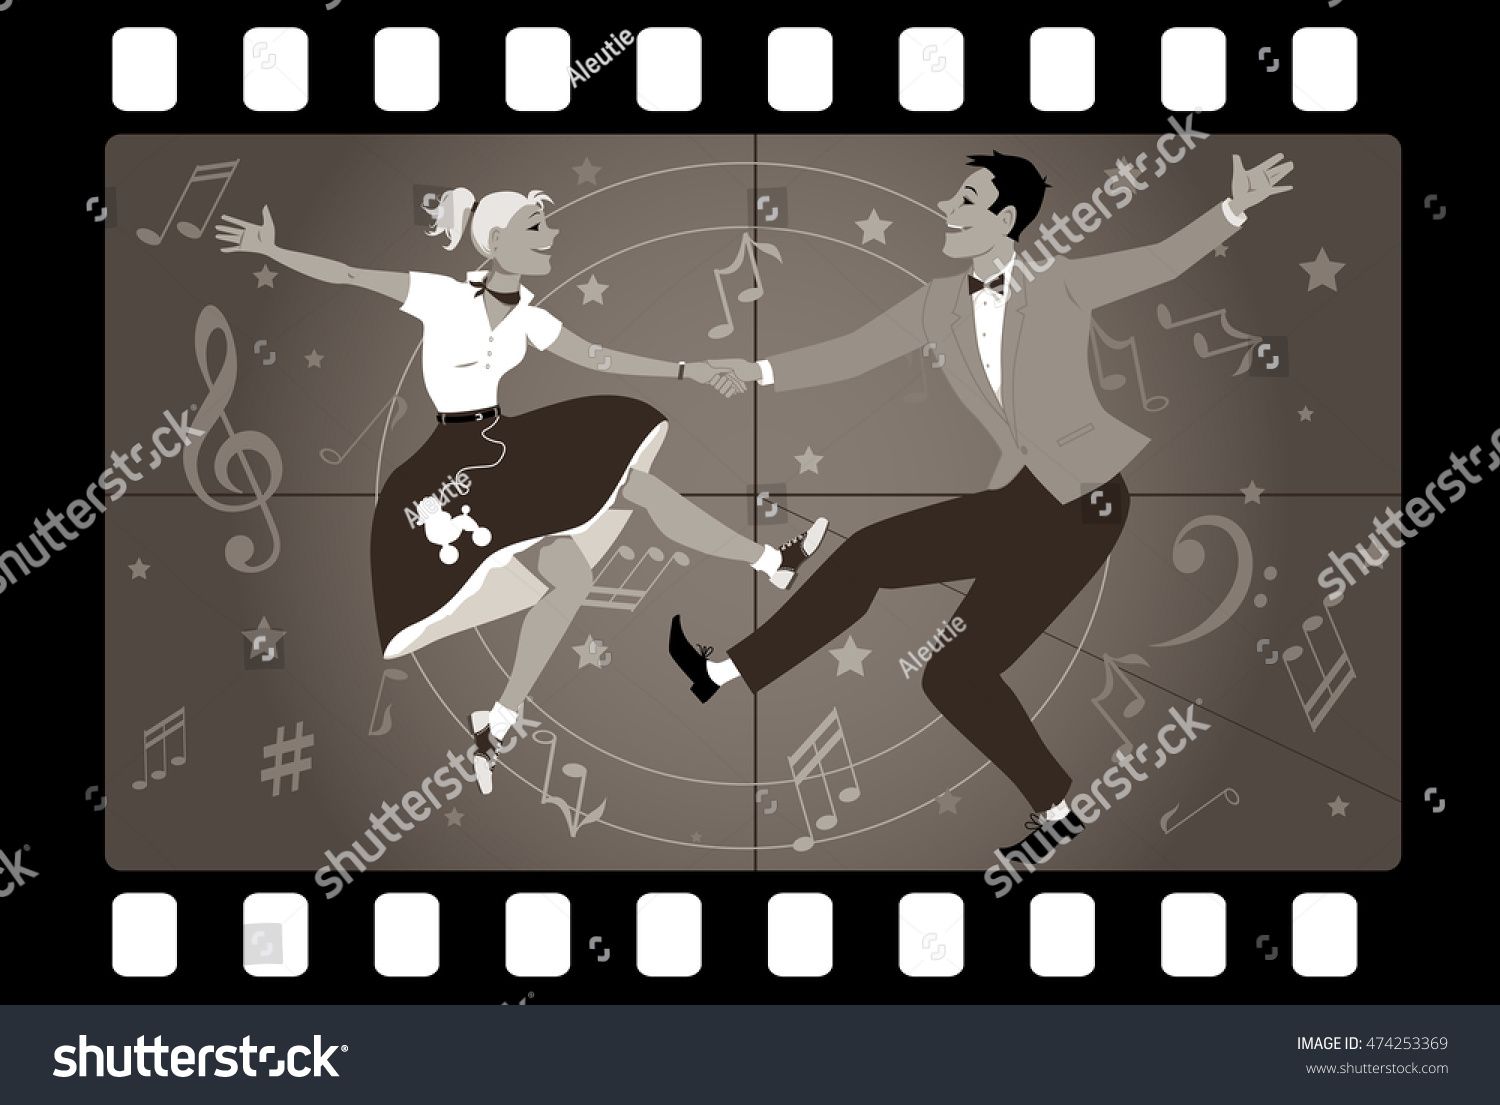 SVG of Couple dancing 1950s style rock and roll in an old movie frame, EPS 8 vector illustration svg